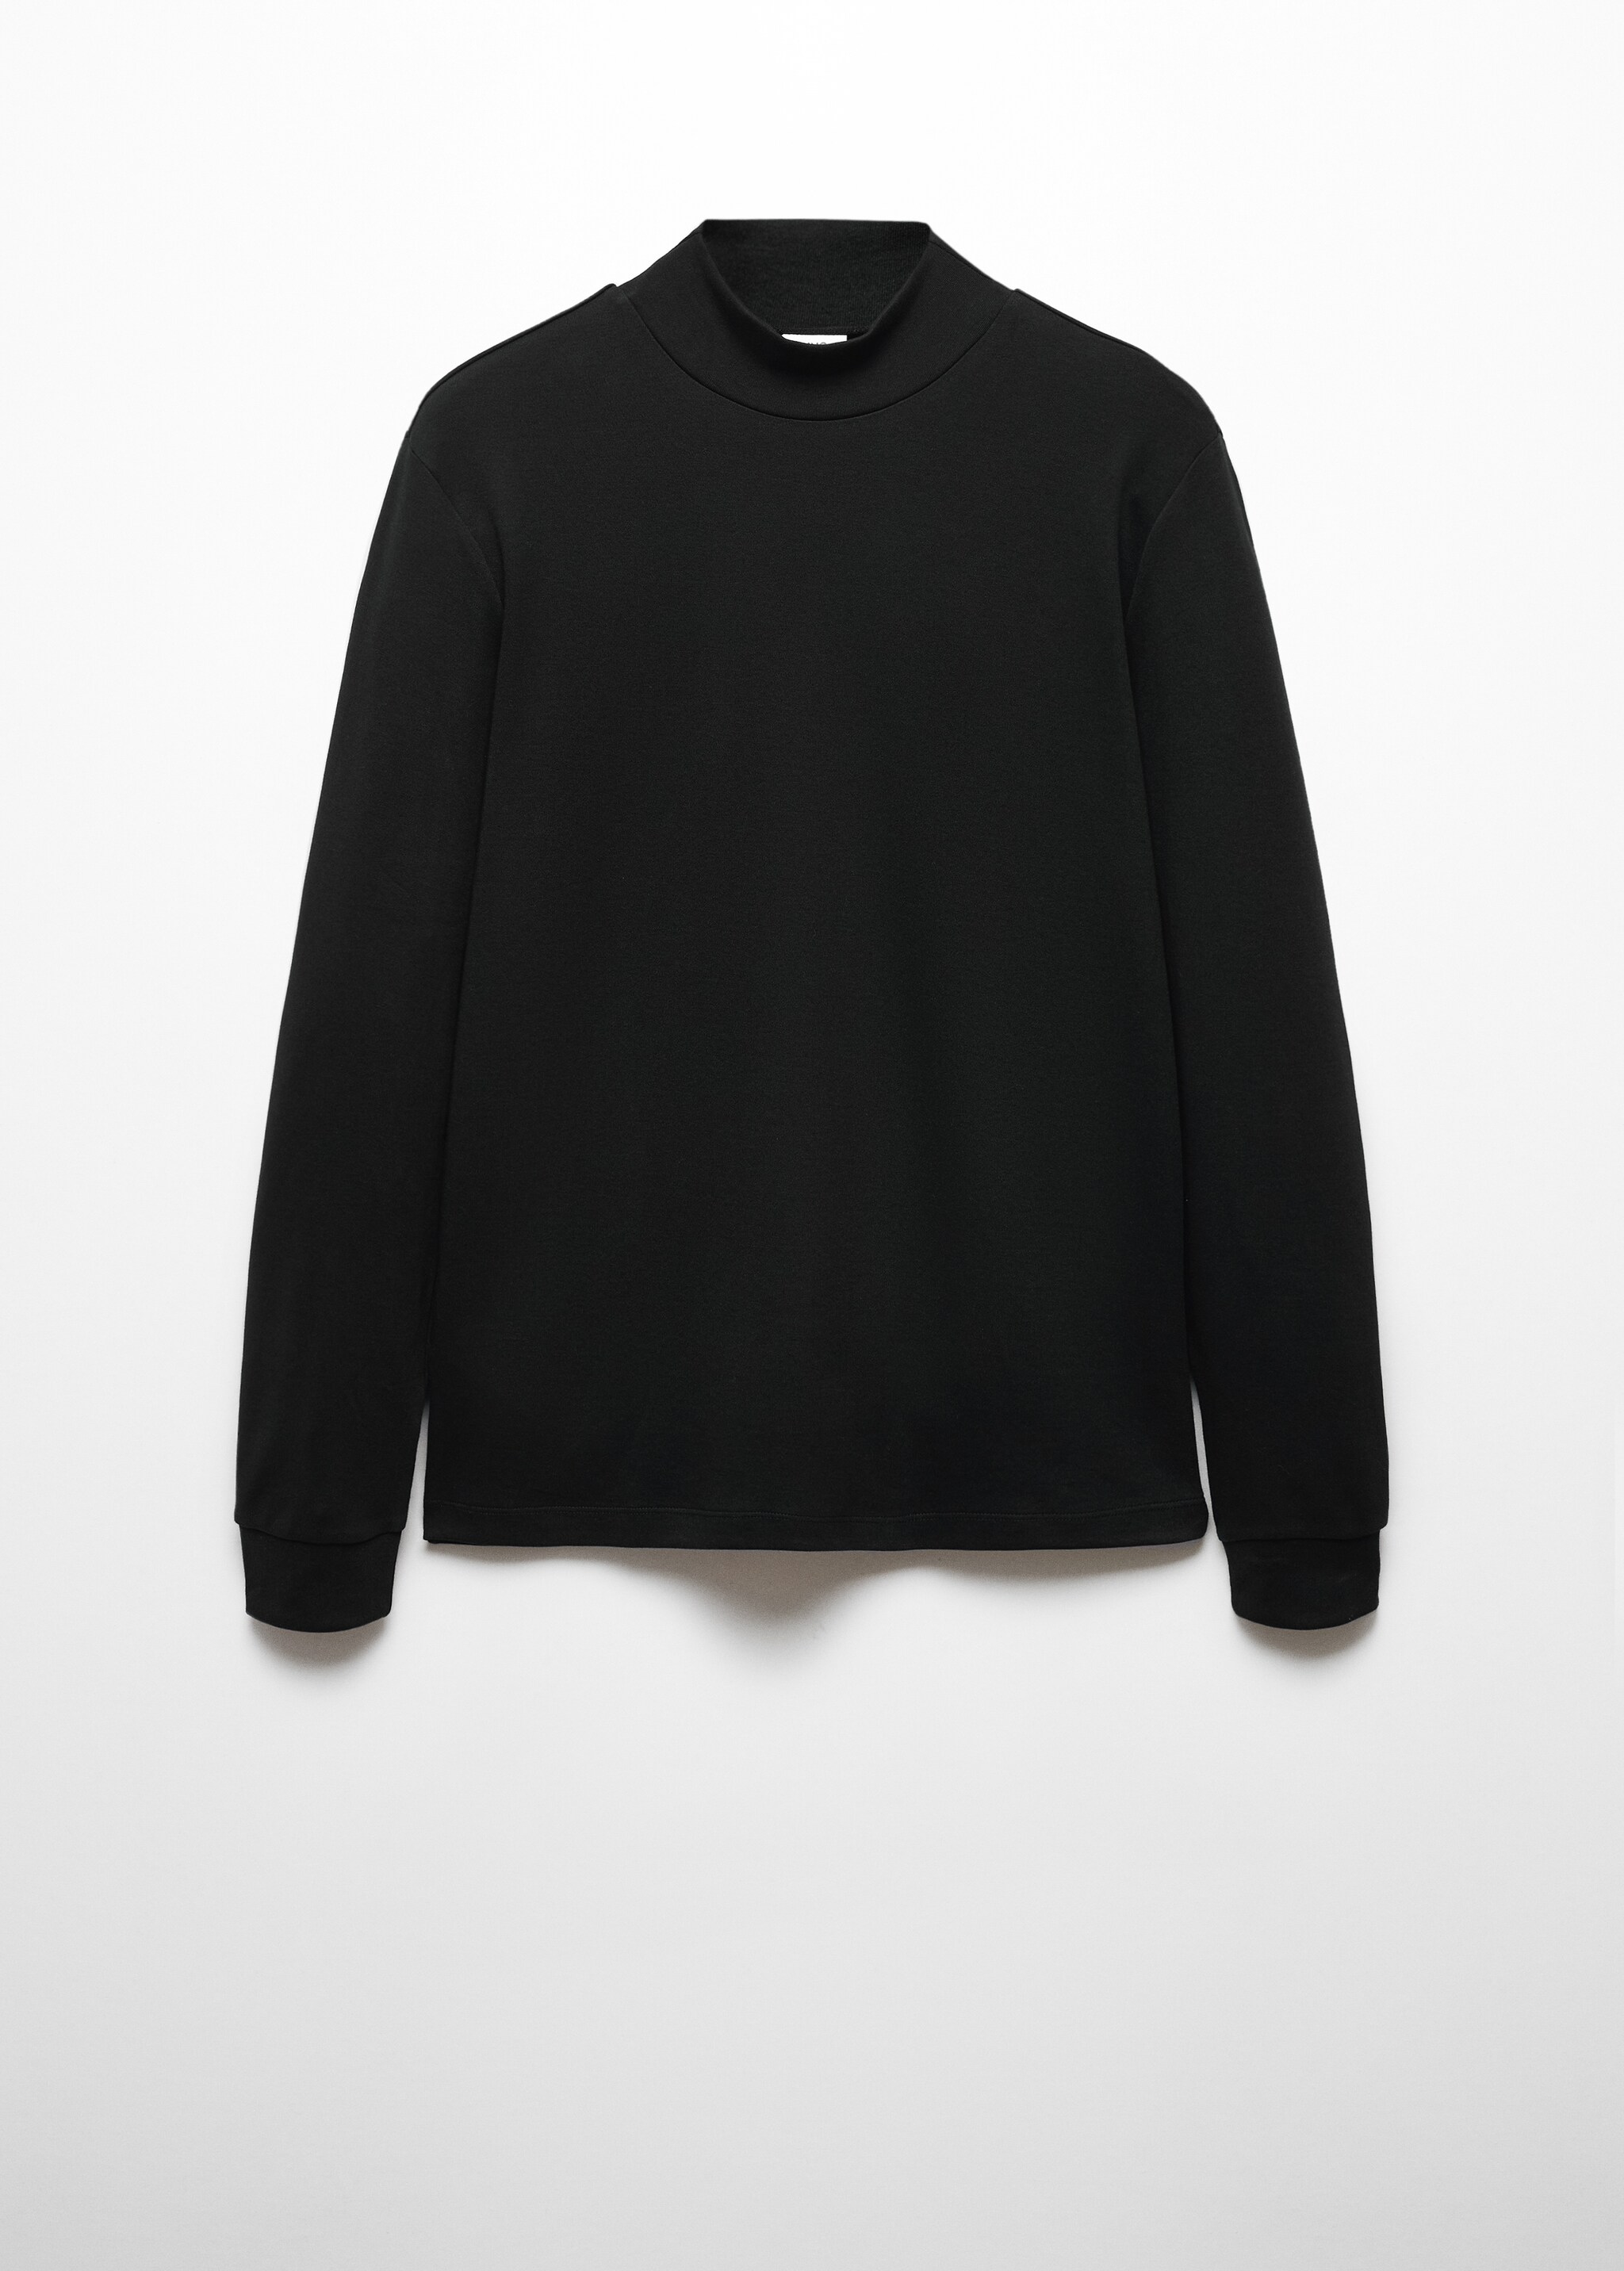 Perkins neck long-sleeved t-shirt - Article without model